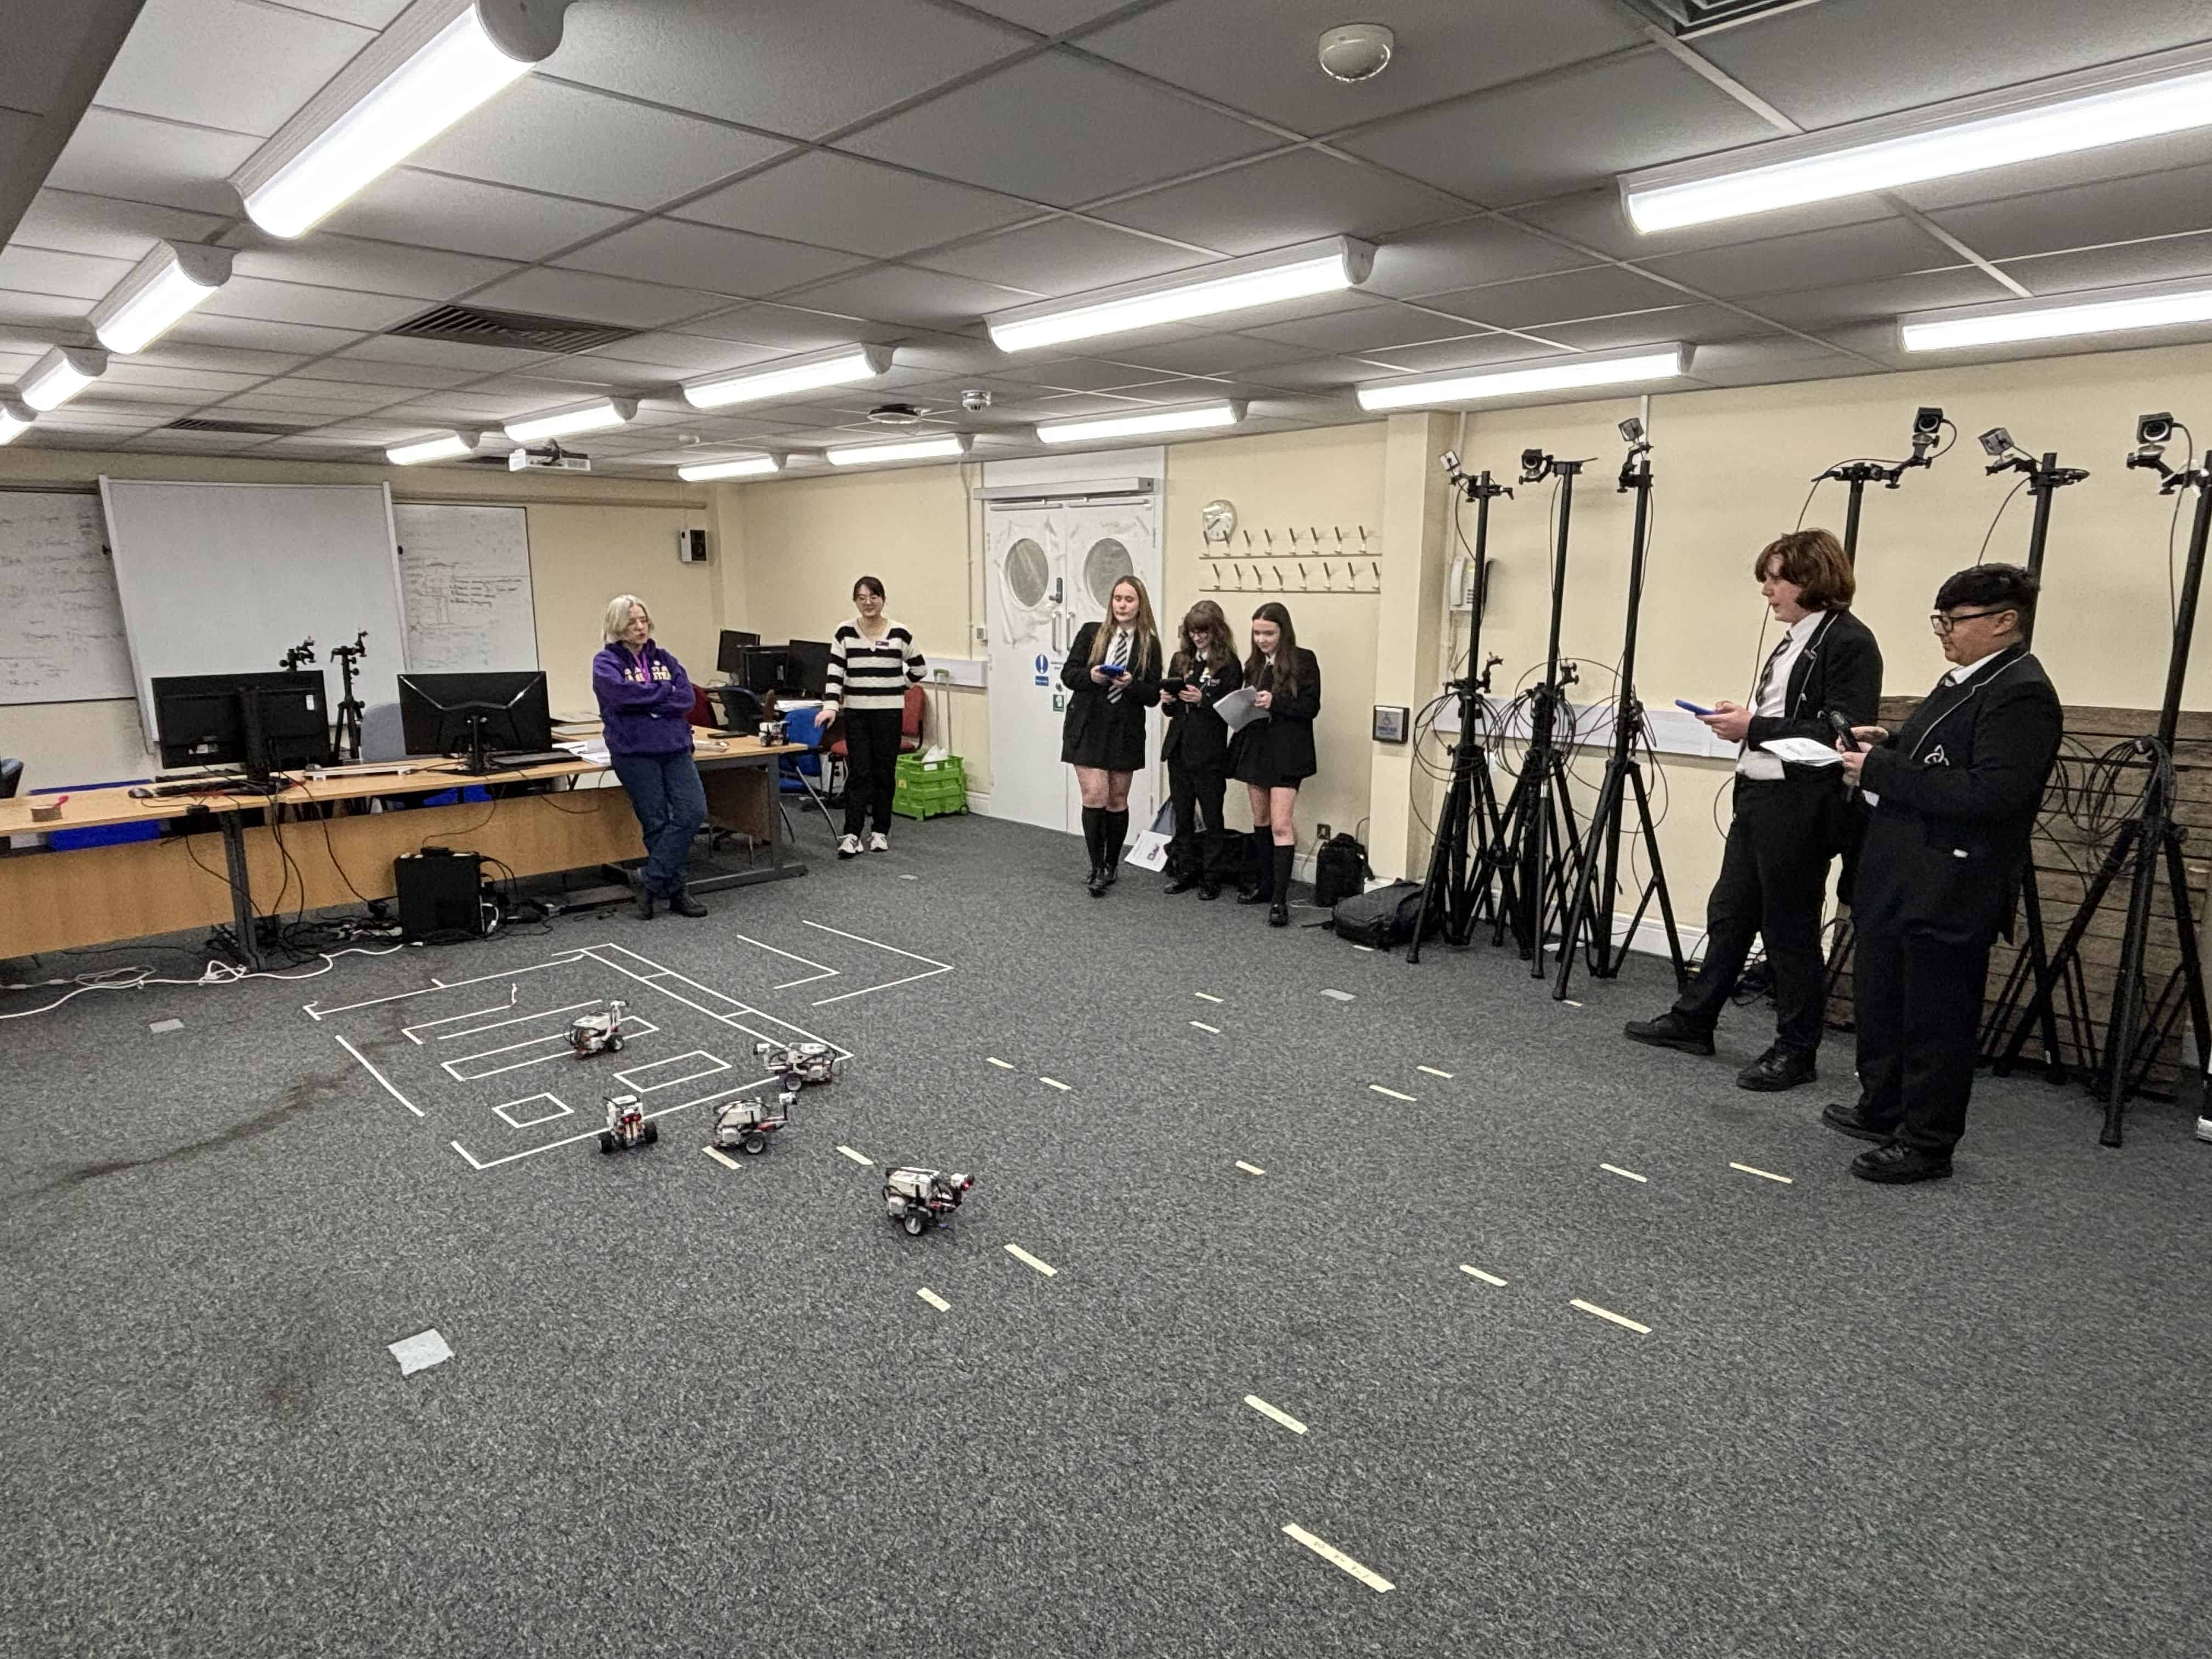 Students from Laurus Ryecroft control Lego Rovers at the University of Manchester Computer Science department.